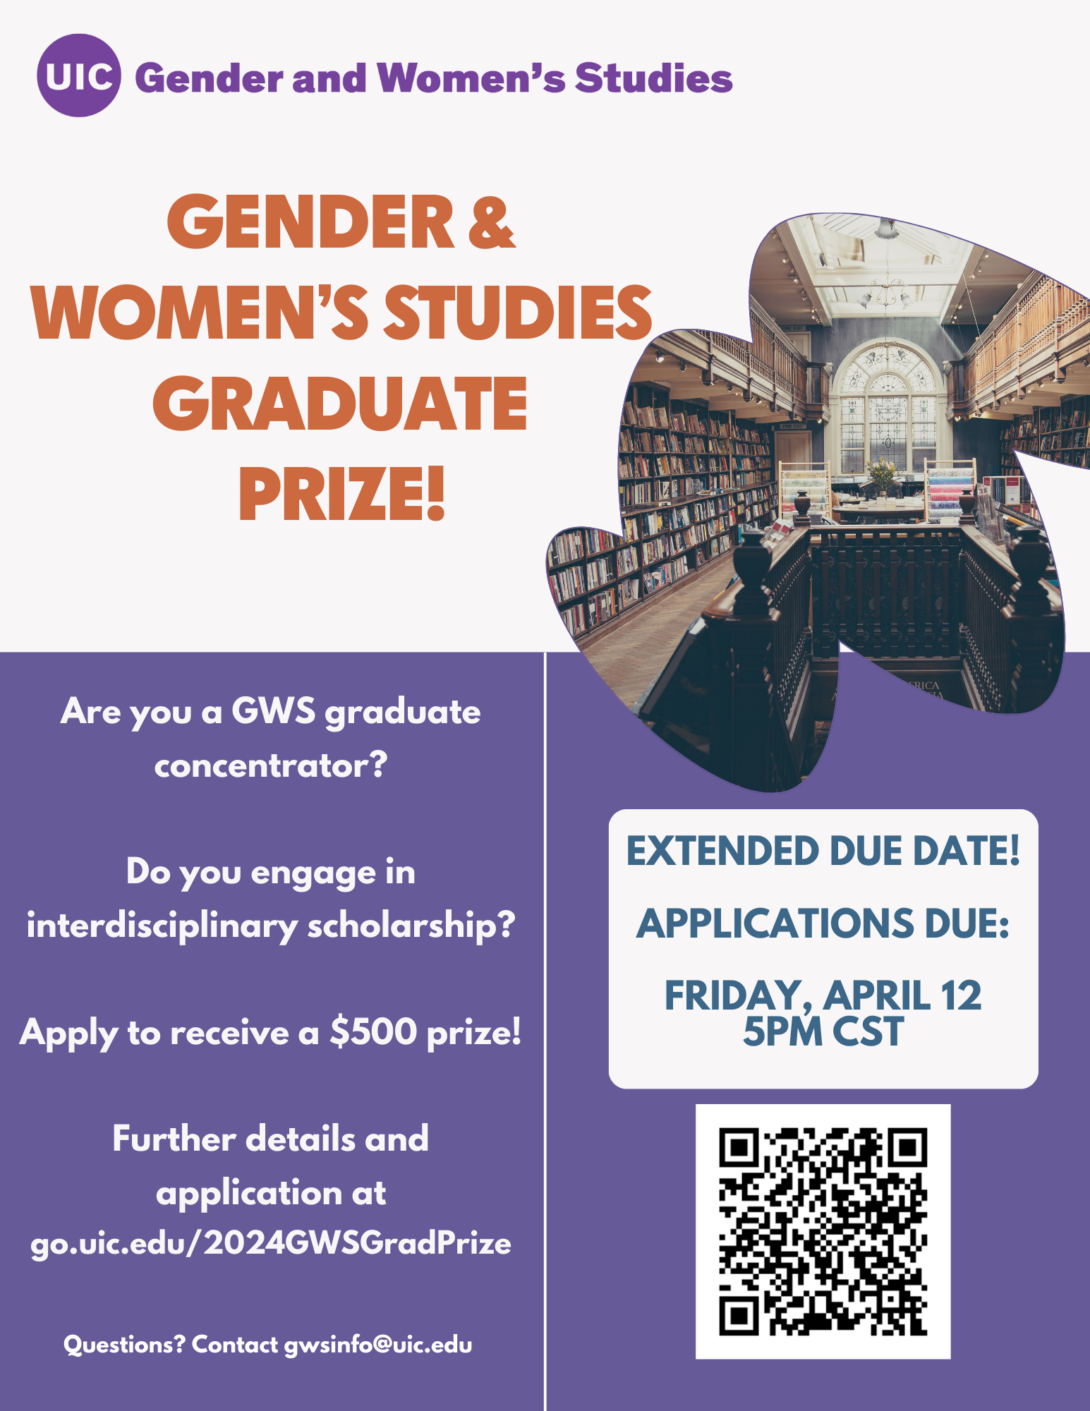 A flyer explaining the GWS Graduate Prize, application criteria, deadline, and application instructions, link, and QR code. The bottom half of the flyer has a purple background and white text. The top half of the flyer has a white background and teal text. On the right, top half of the flyer is an image of a library type room with a wooden staircase in the foreground, a large window in the background, and bookshelves filled with books lining the walls. The GWS logo in teal appears in the top left portion of the flyer.